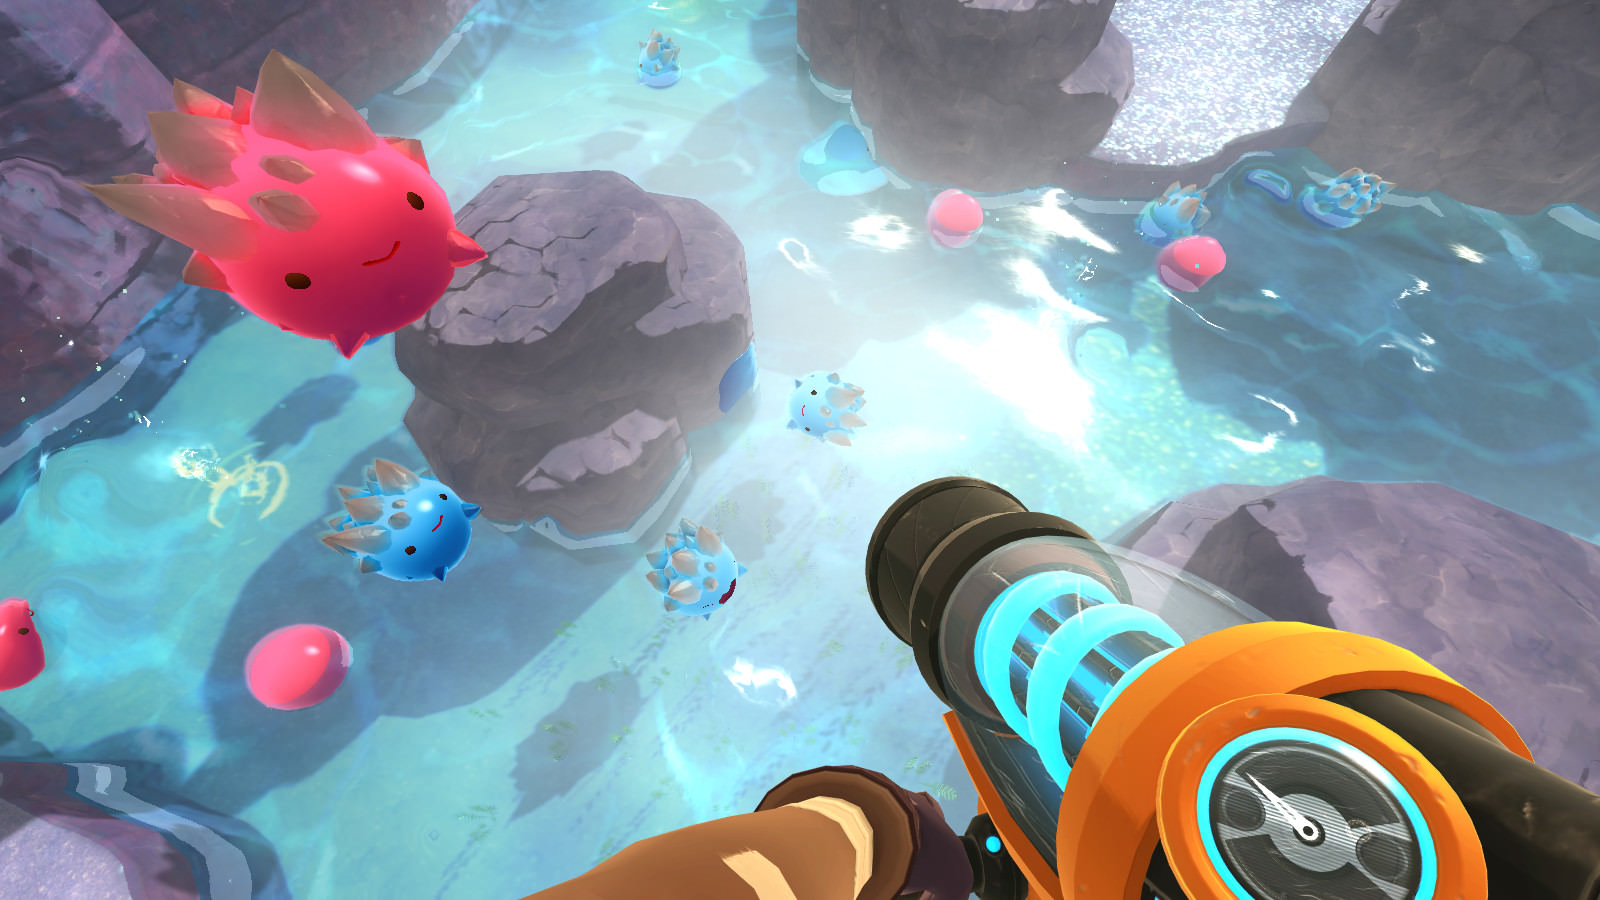 slime rancher 2 initial release date